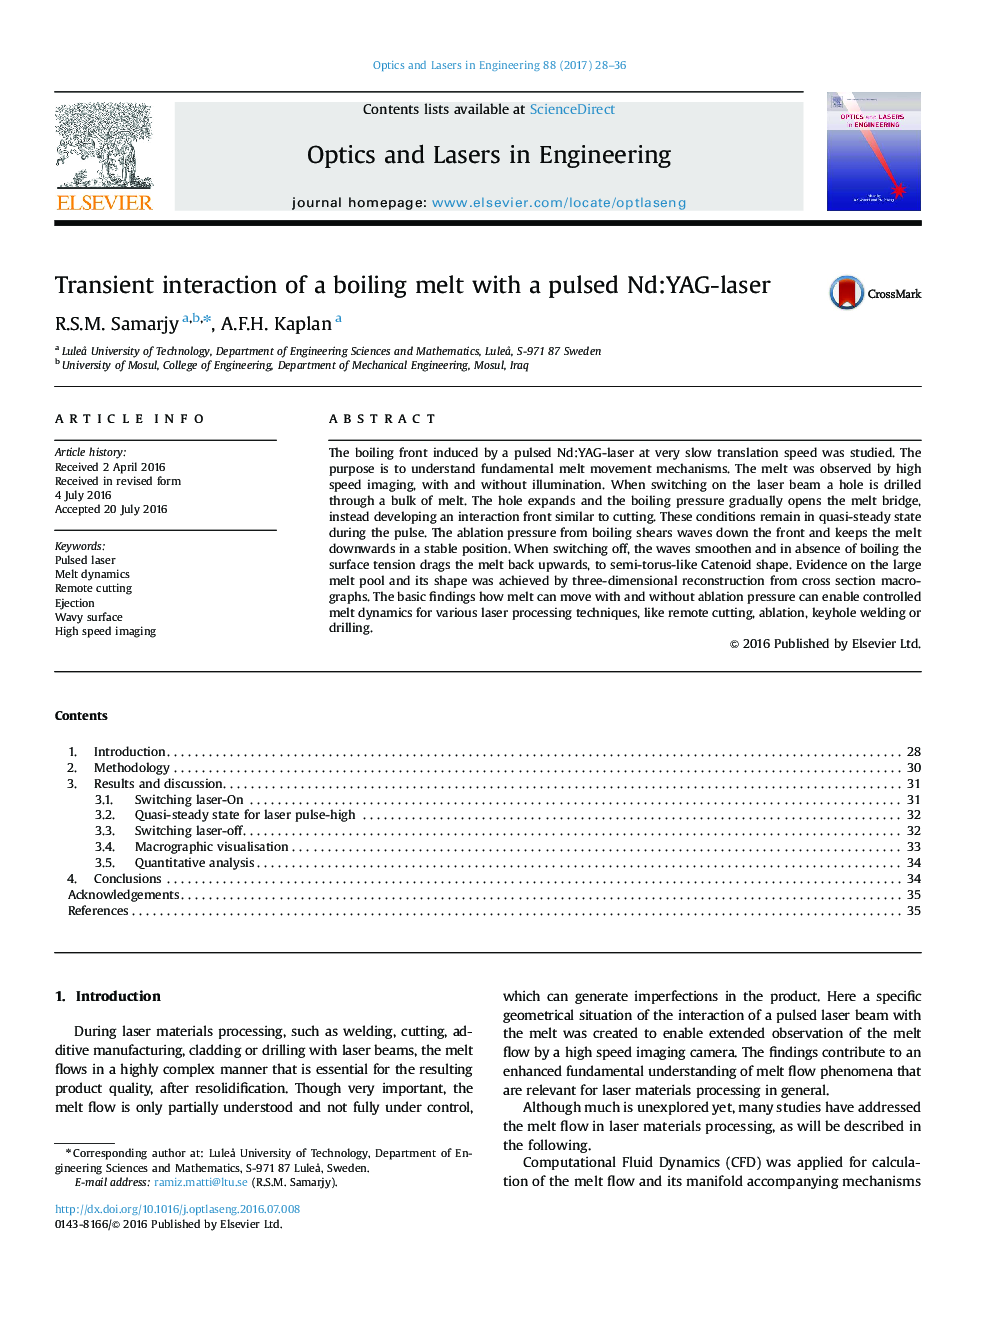 Transient interaction of a boiling melt with a pulsed Nd:YAG-laser